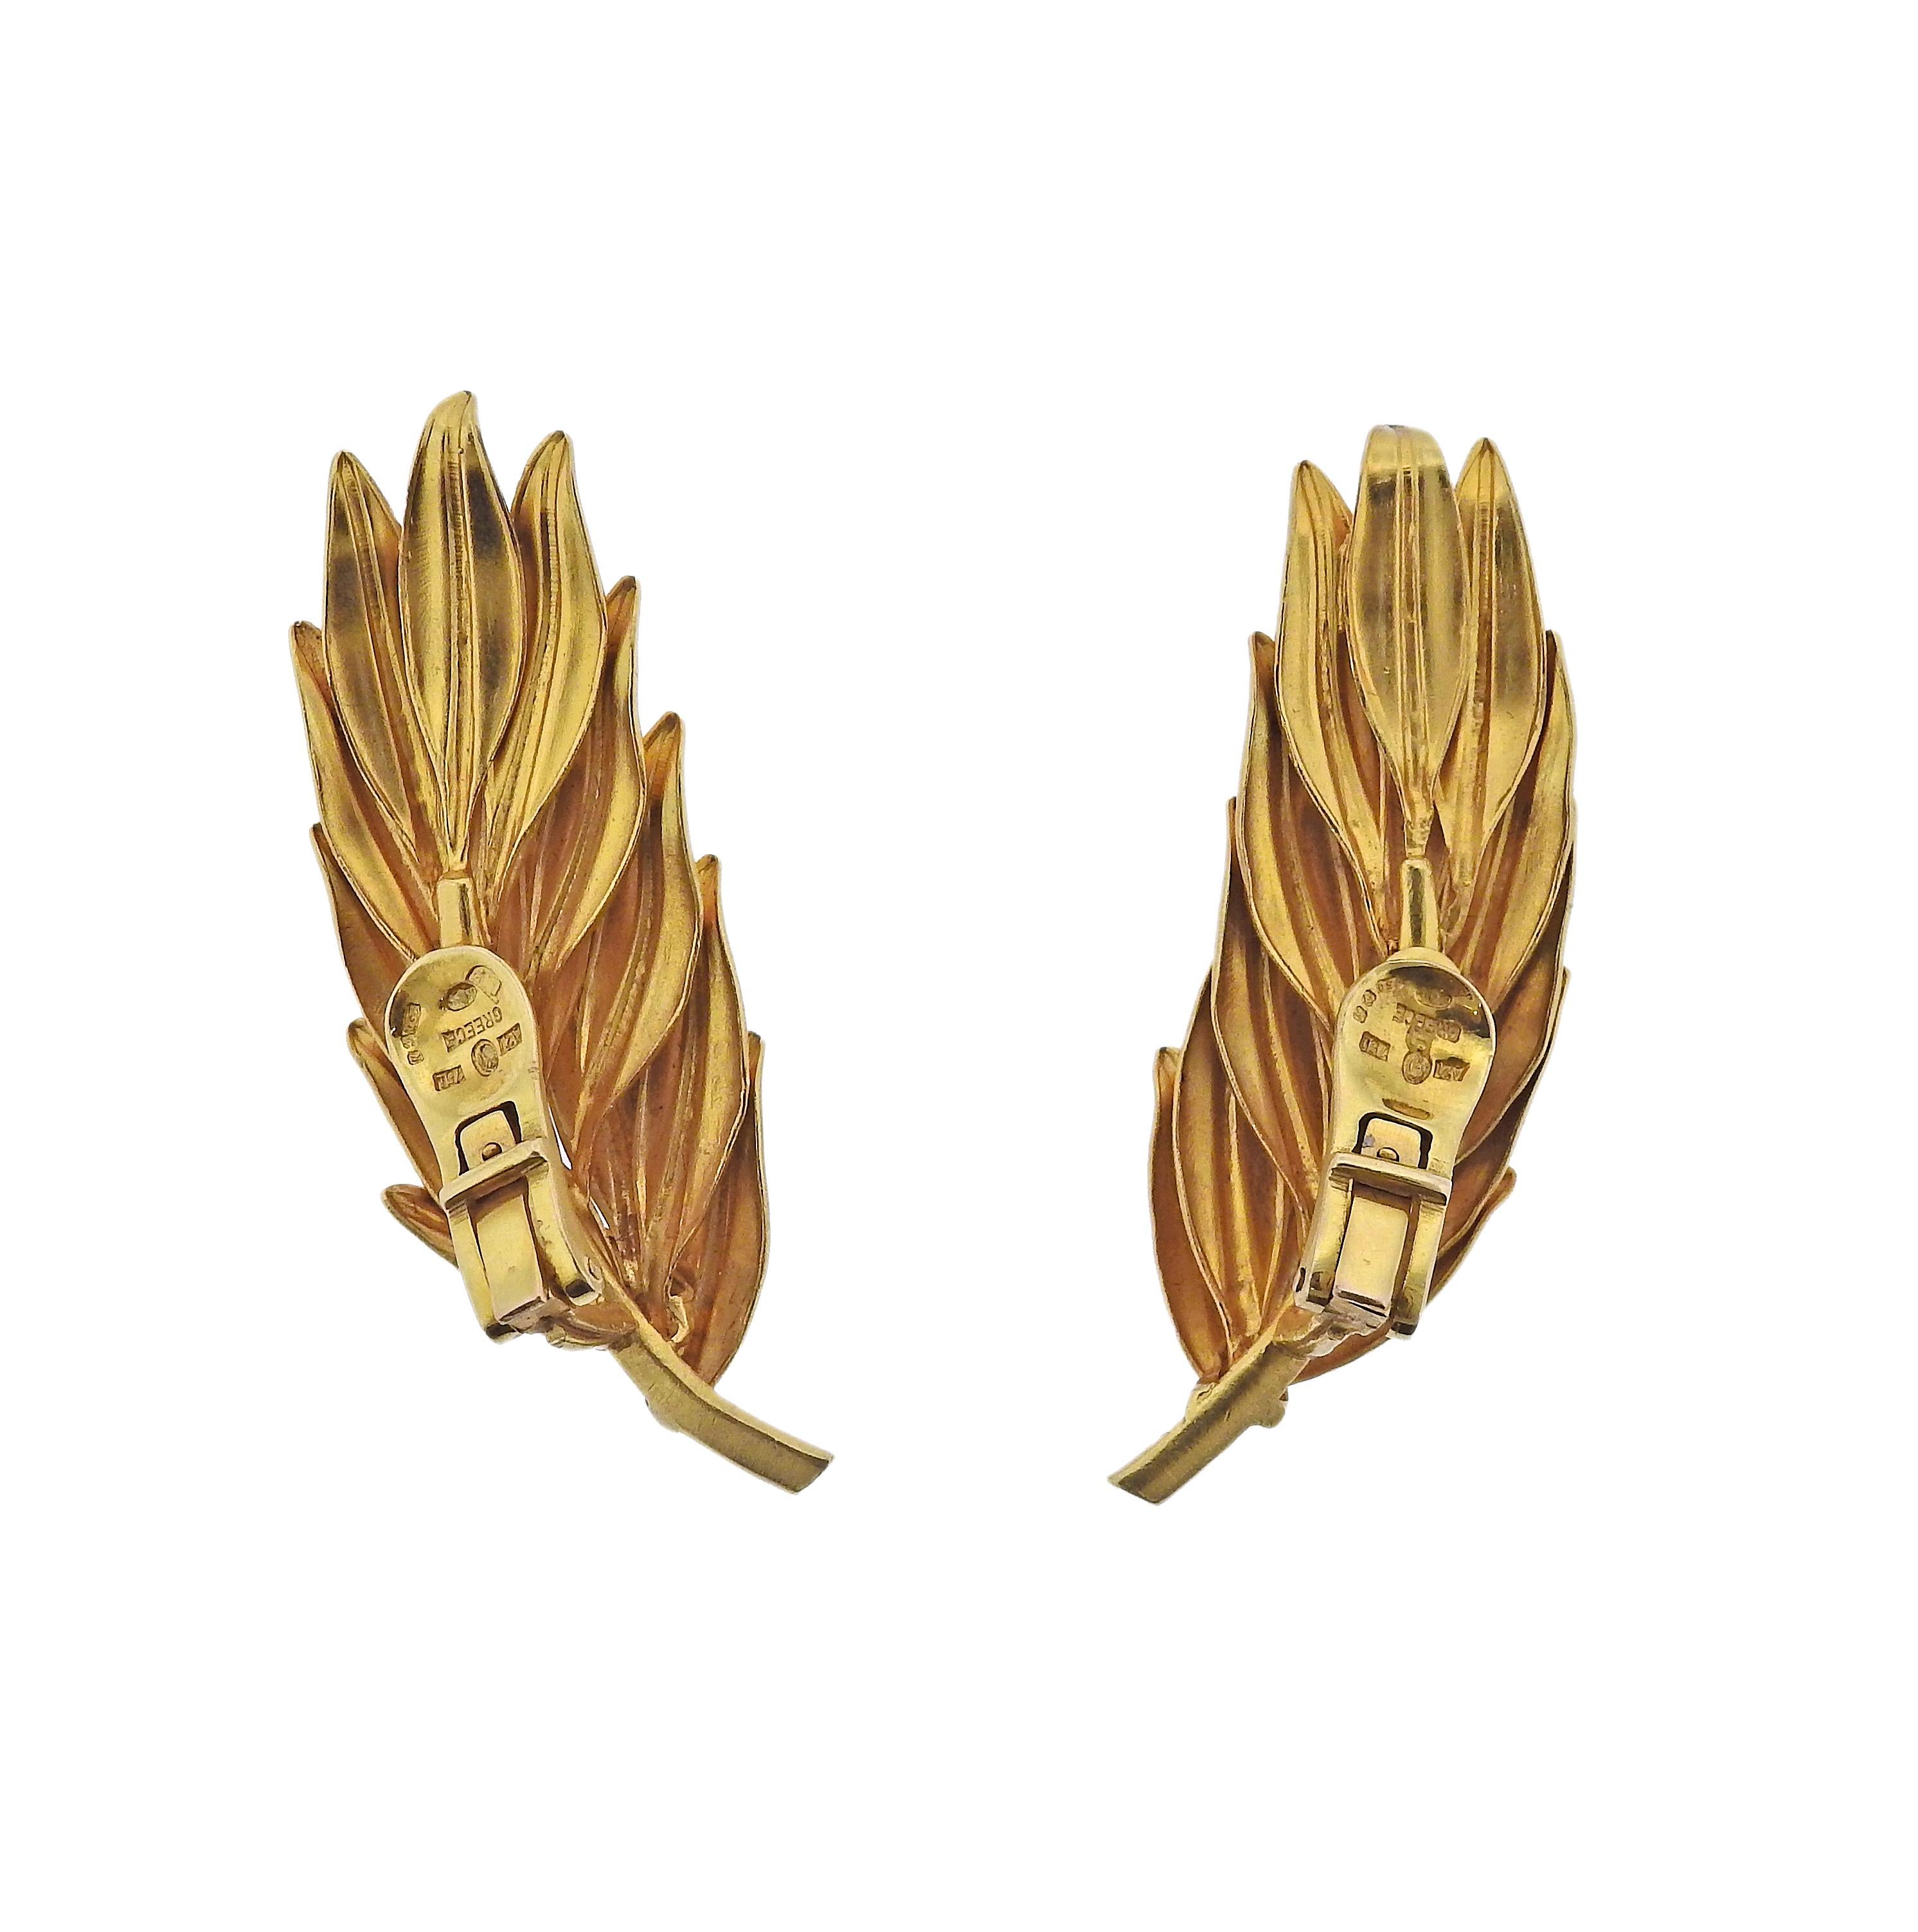 Pair of large 18k gold feather motif earrings by Ilias Lalaounis. Earrings measure 2